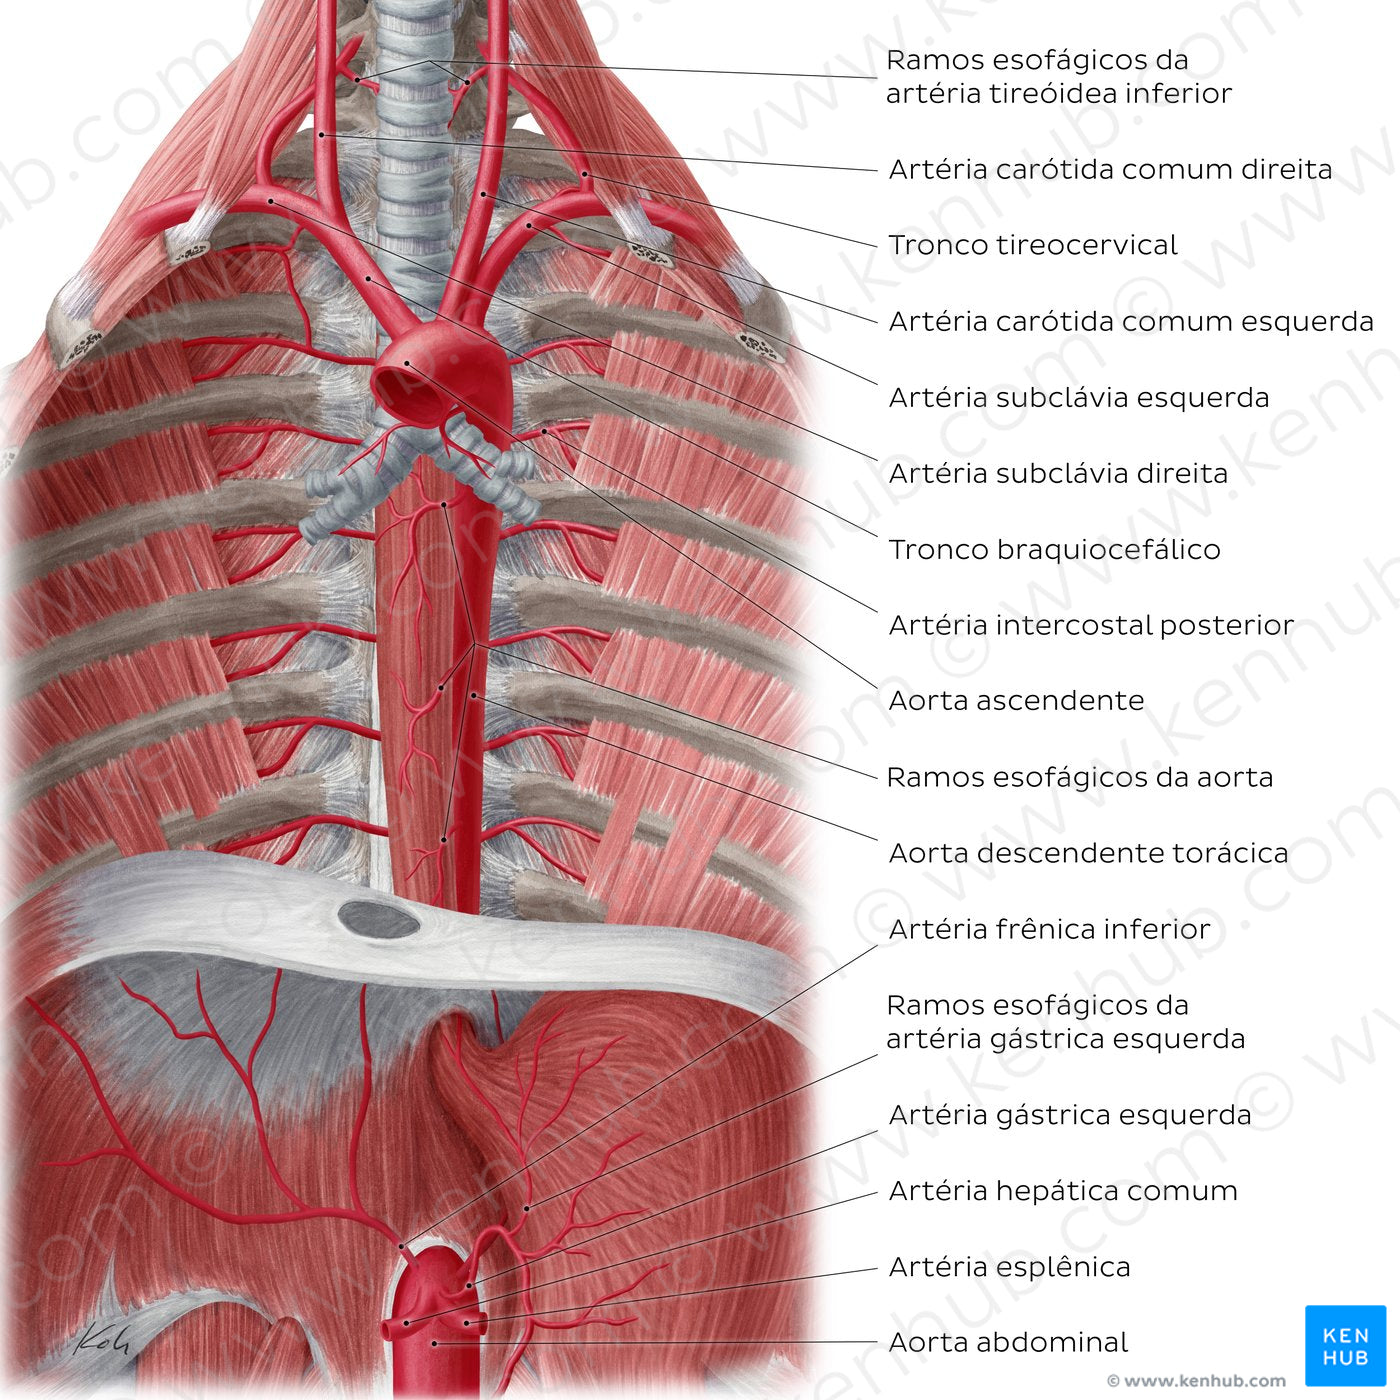 Arteries of the posterior thoracic wall (Portuguese)